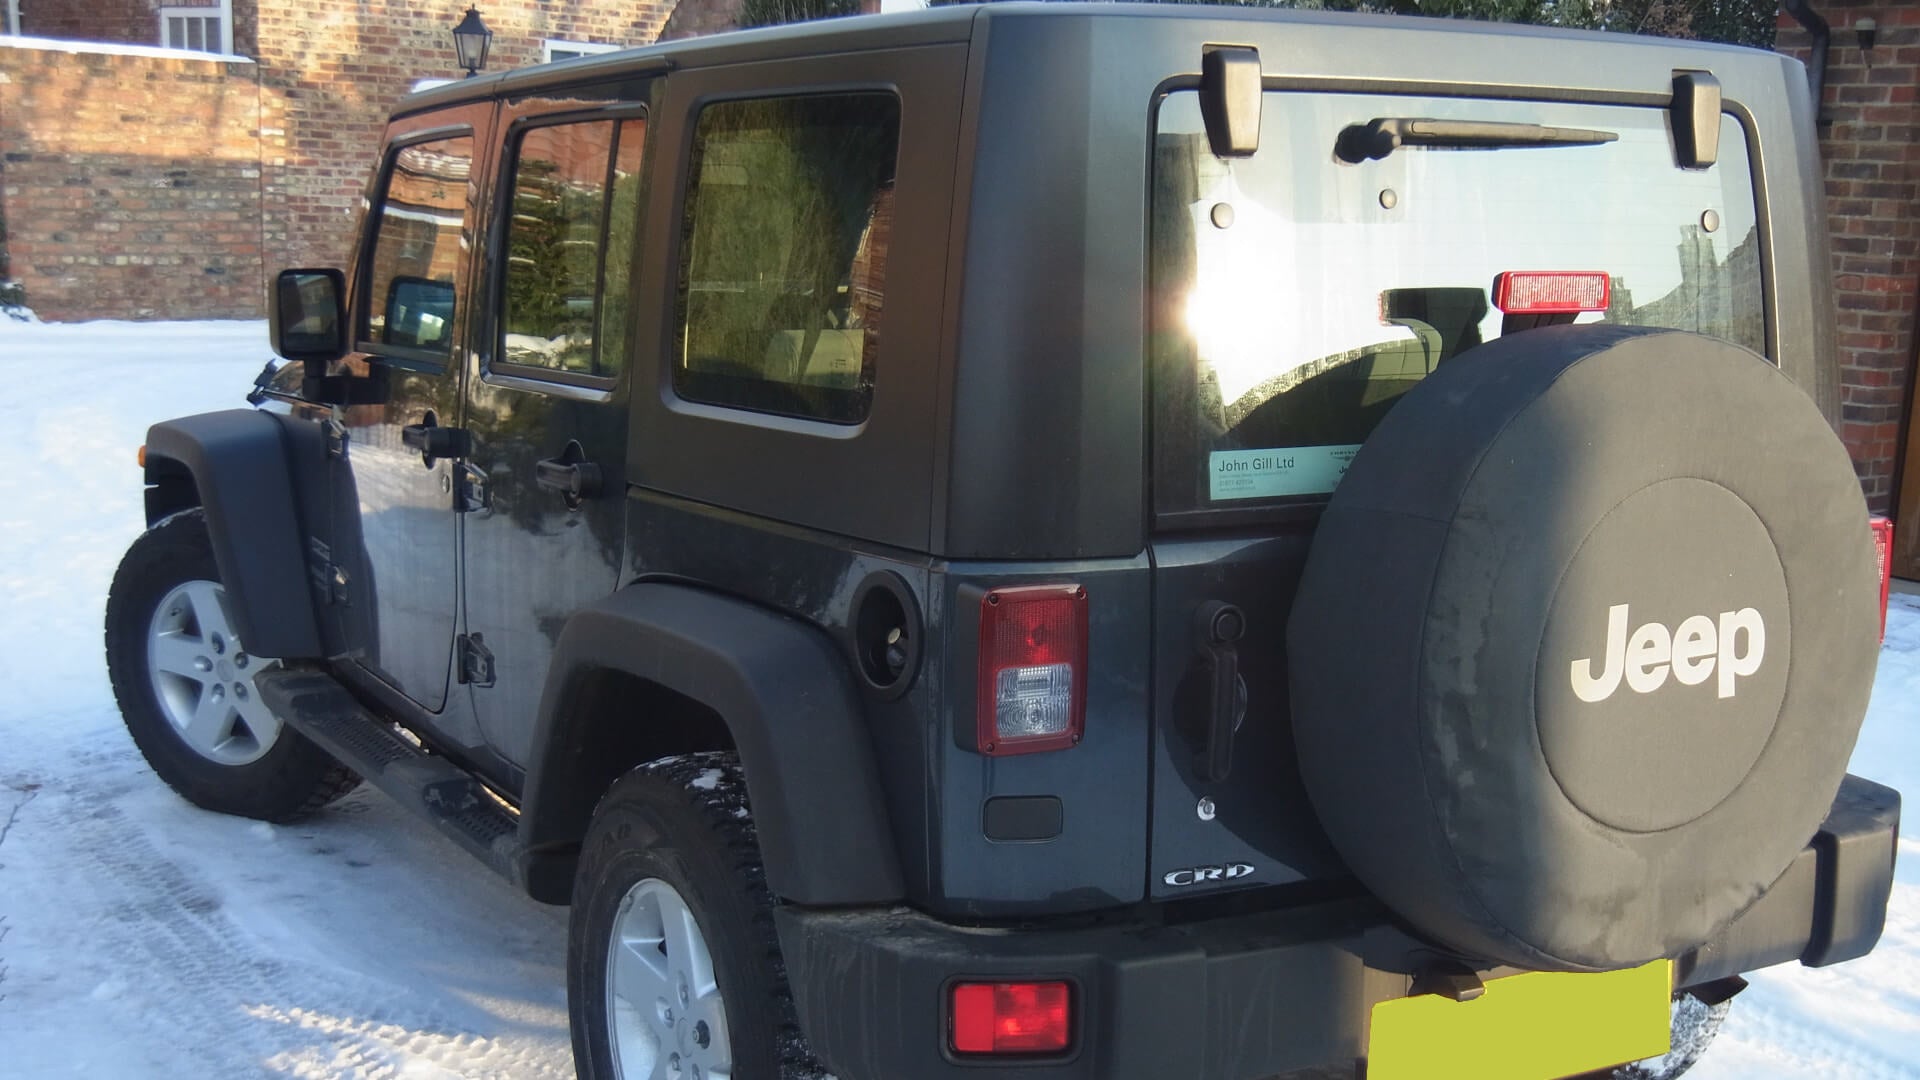 Direct4x4 Accessories for Jeep Wrangler Vehicles